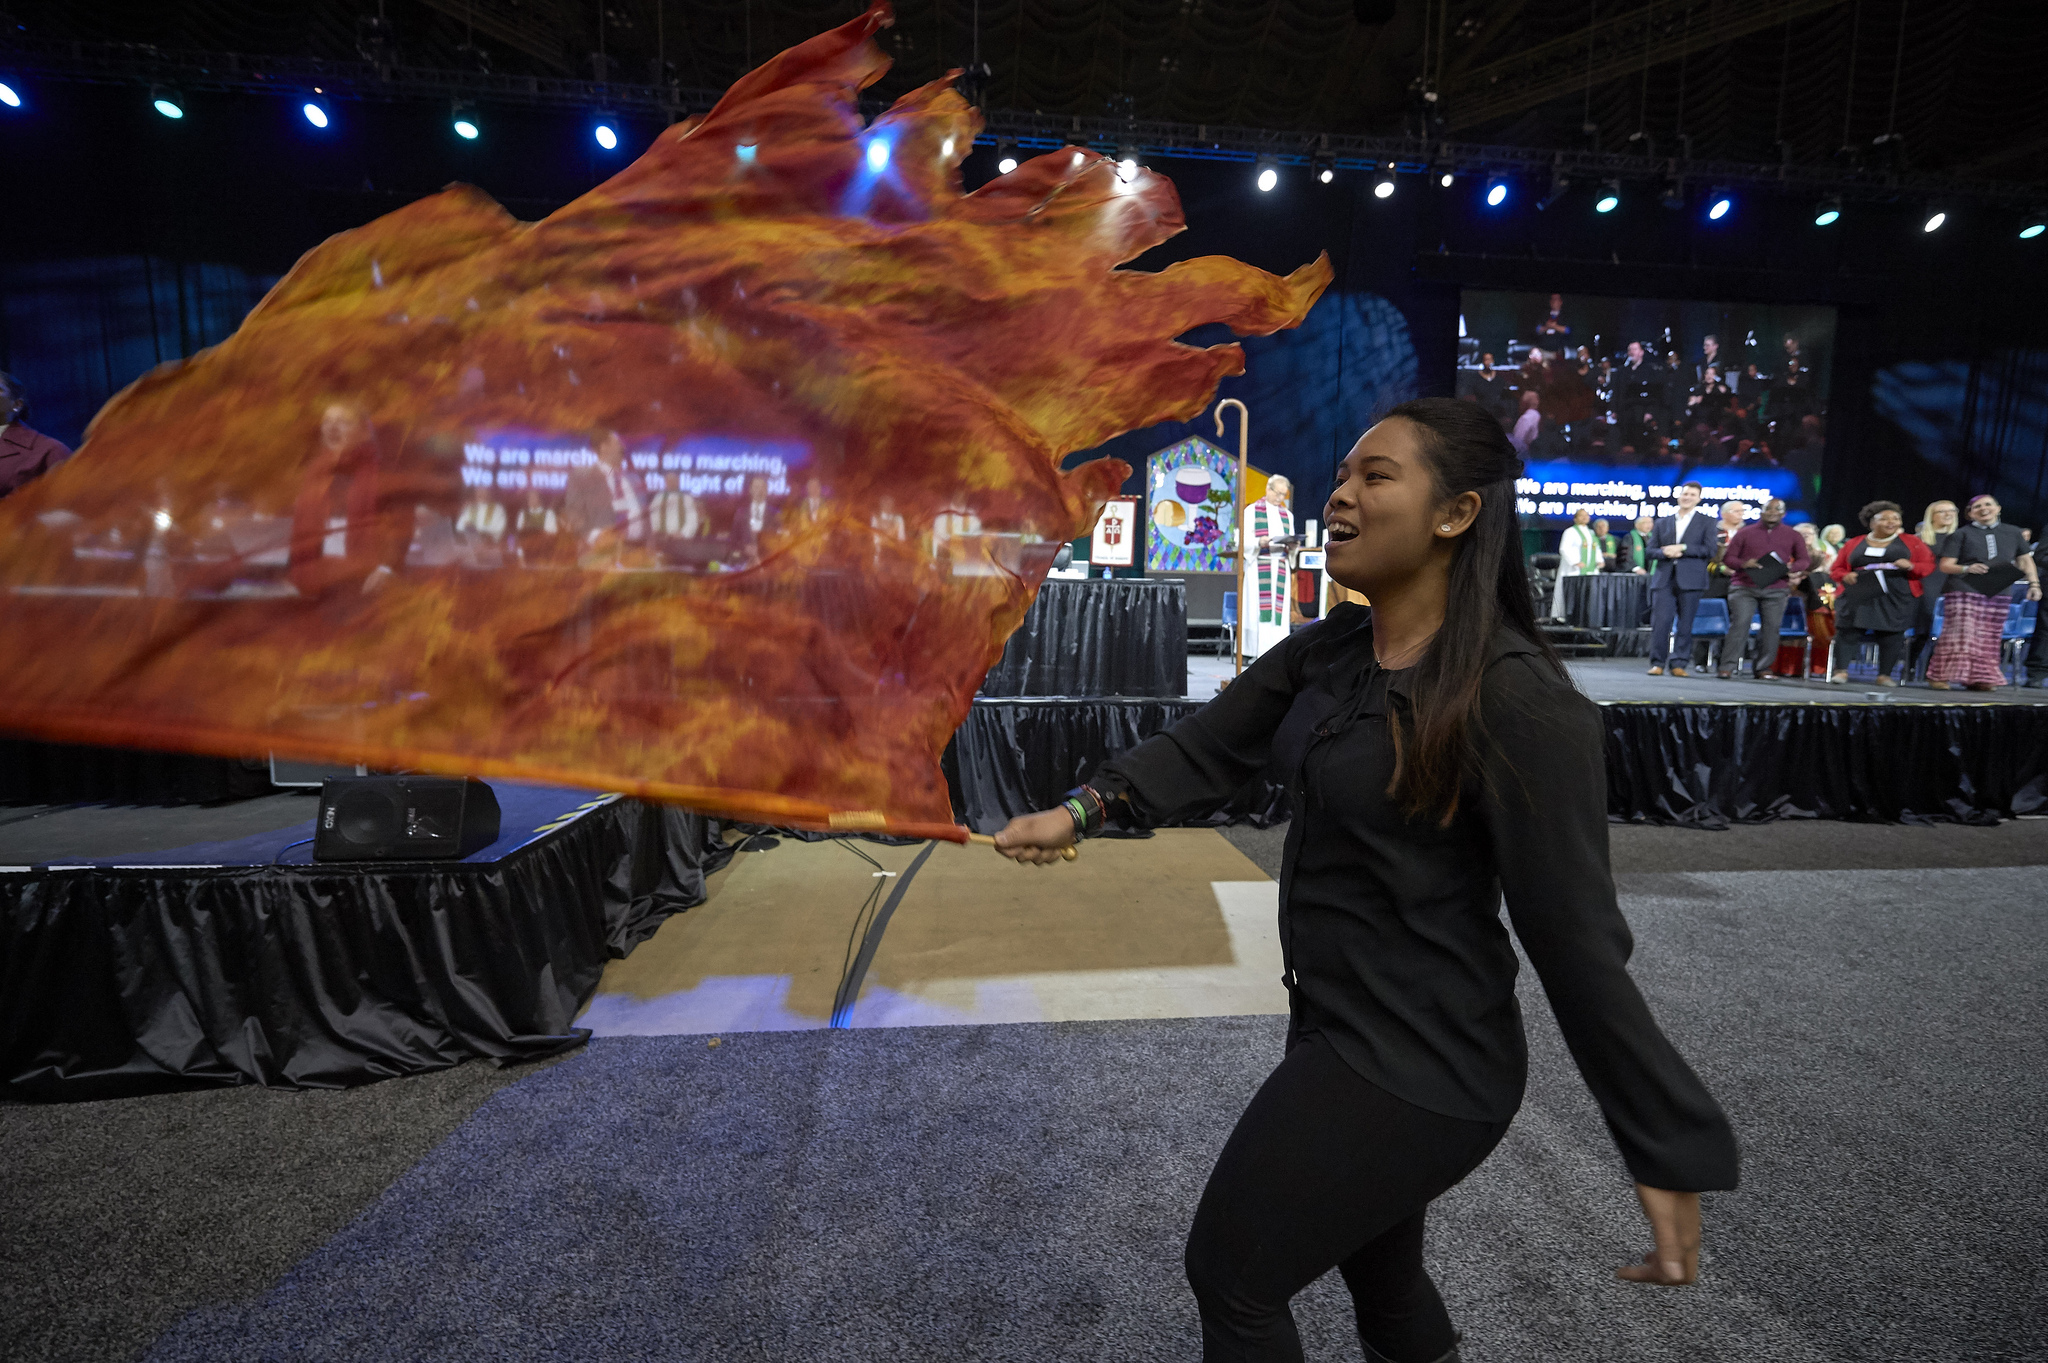 A liturgical dancer waves a flag during worship on February 24, 2019, at the Special Session of the General Conference of The United Methodist Church, held in St. Louis, Missouri. Photo by Paul Jeffrey, UMNS.